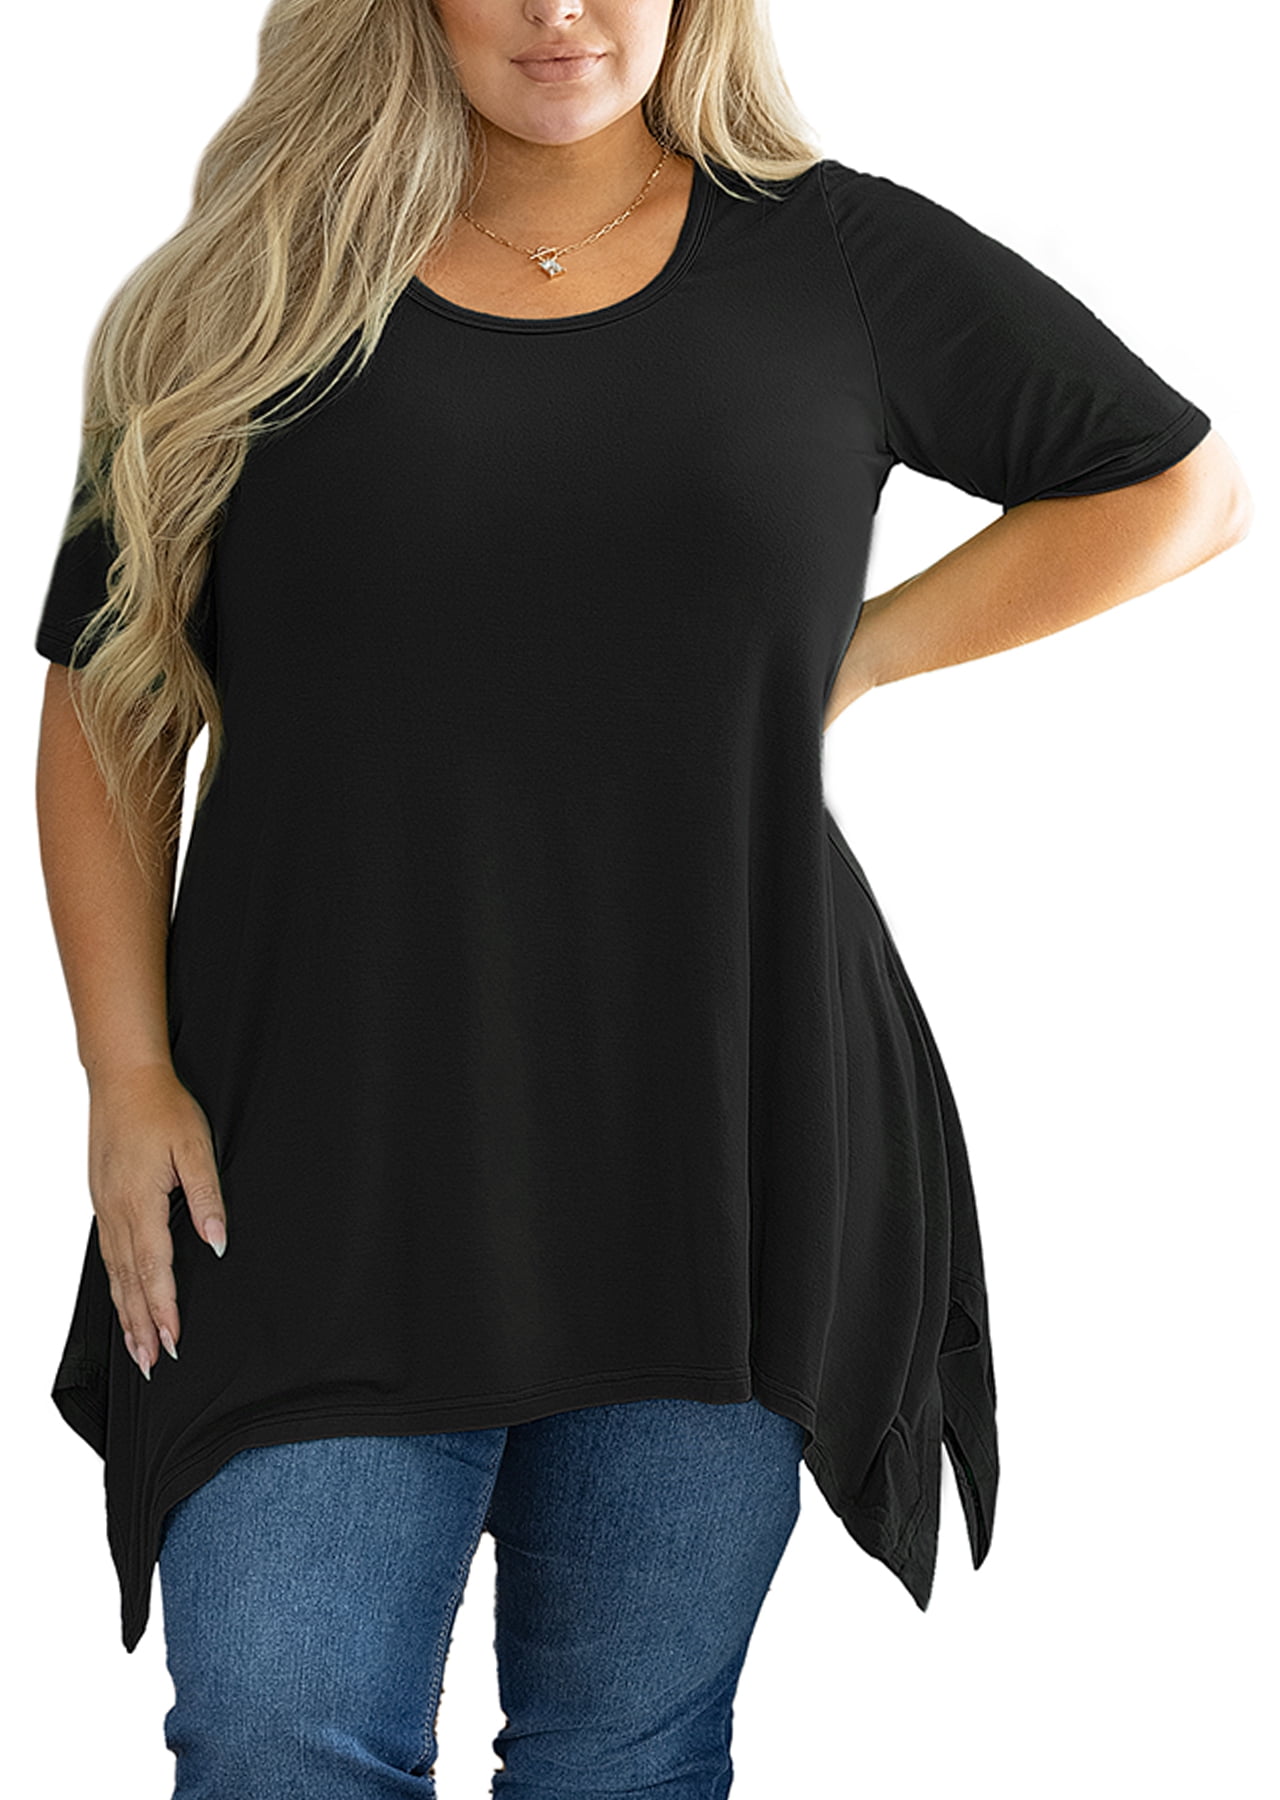 SHOWMALL Plus Size Tops for Women Tunic Clothes Short Sleeve Black ...